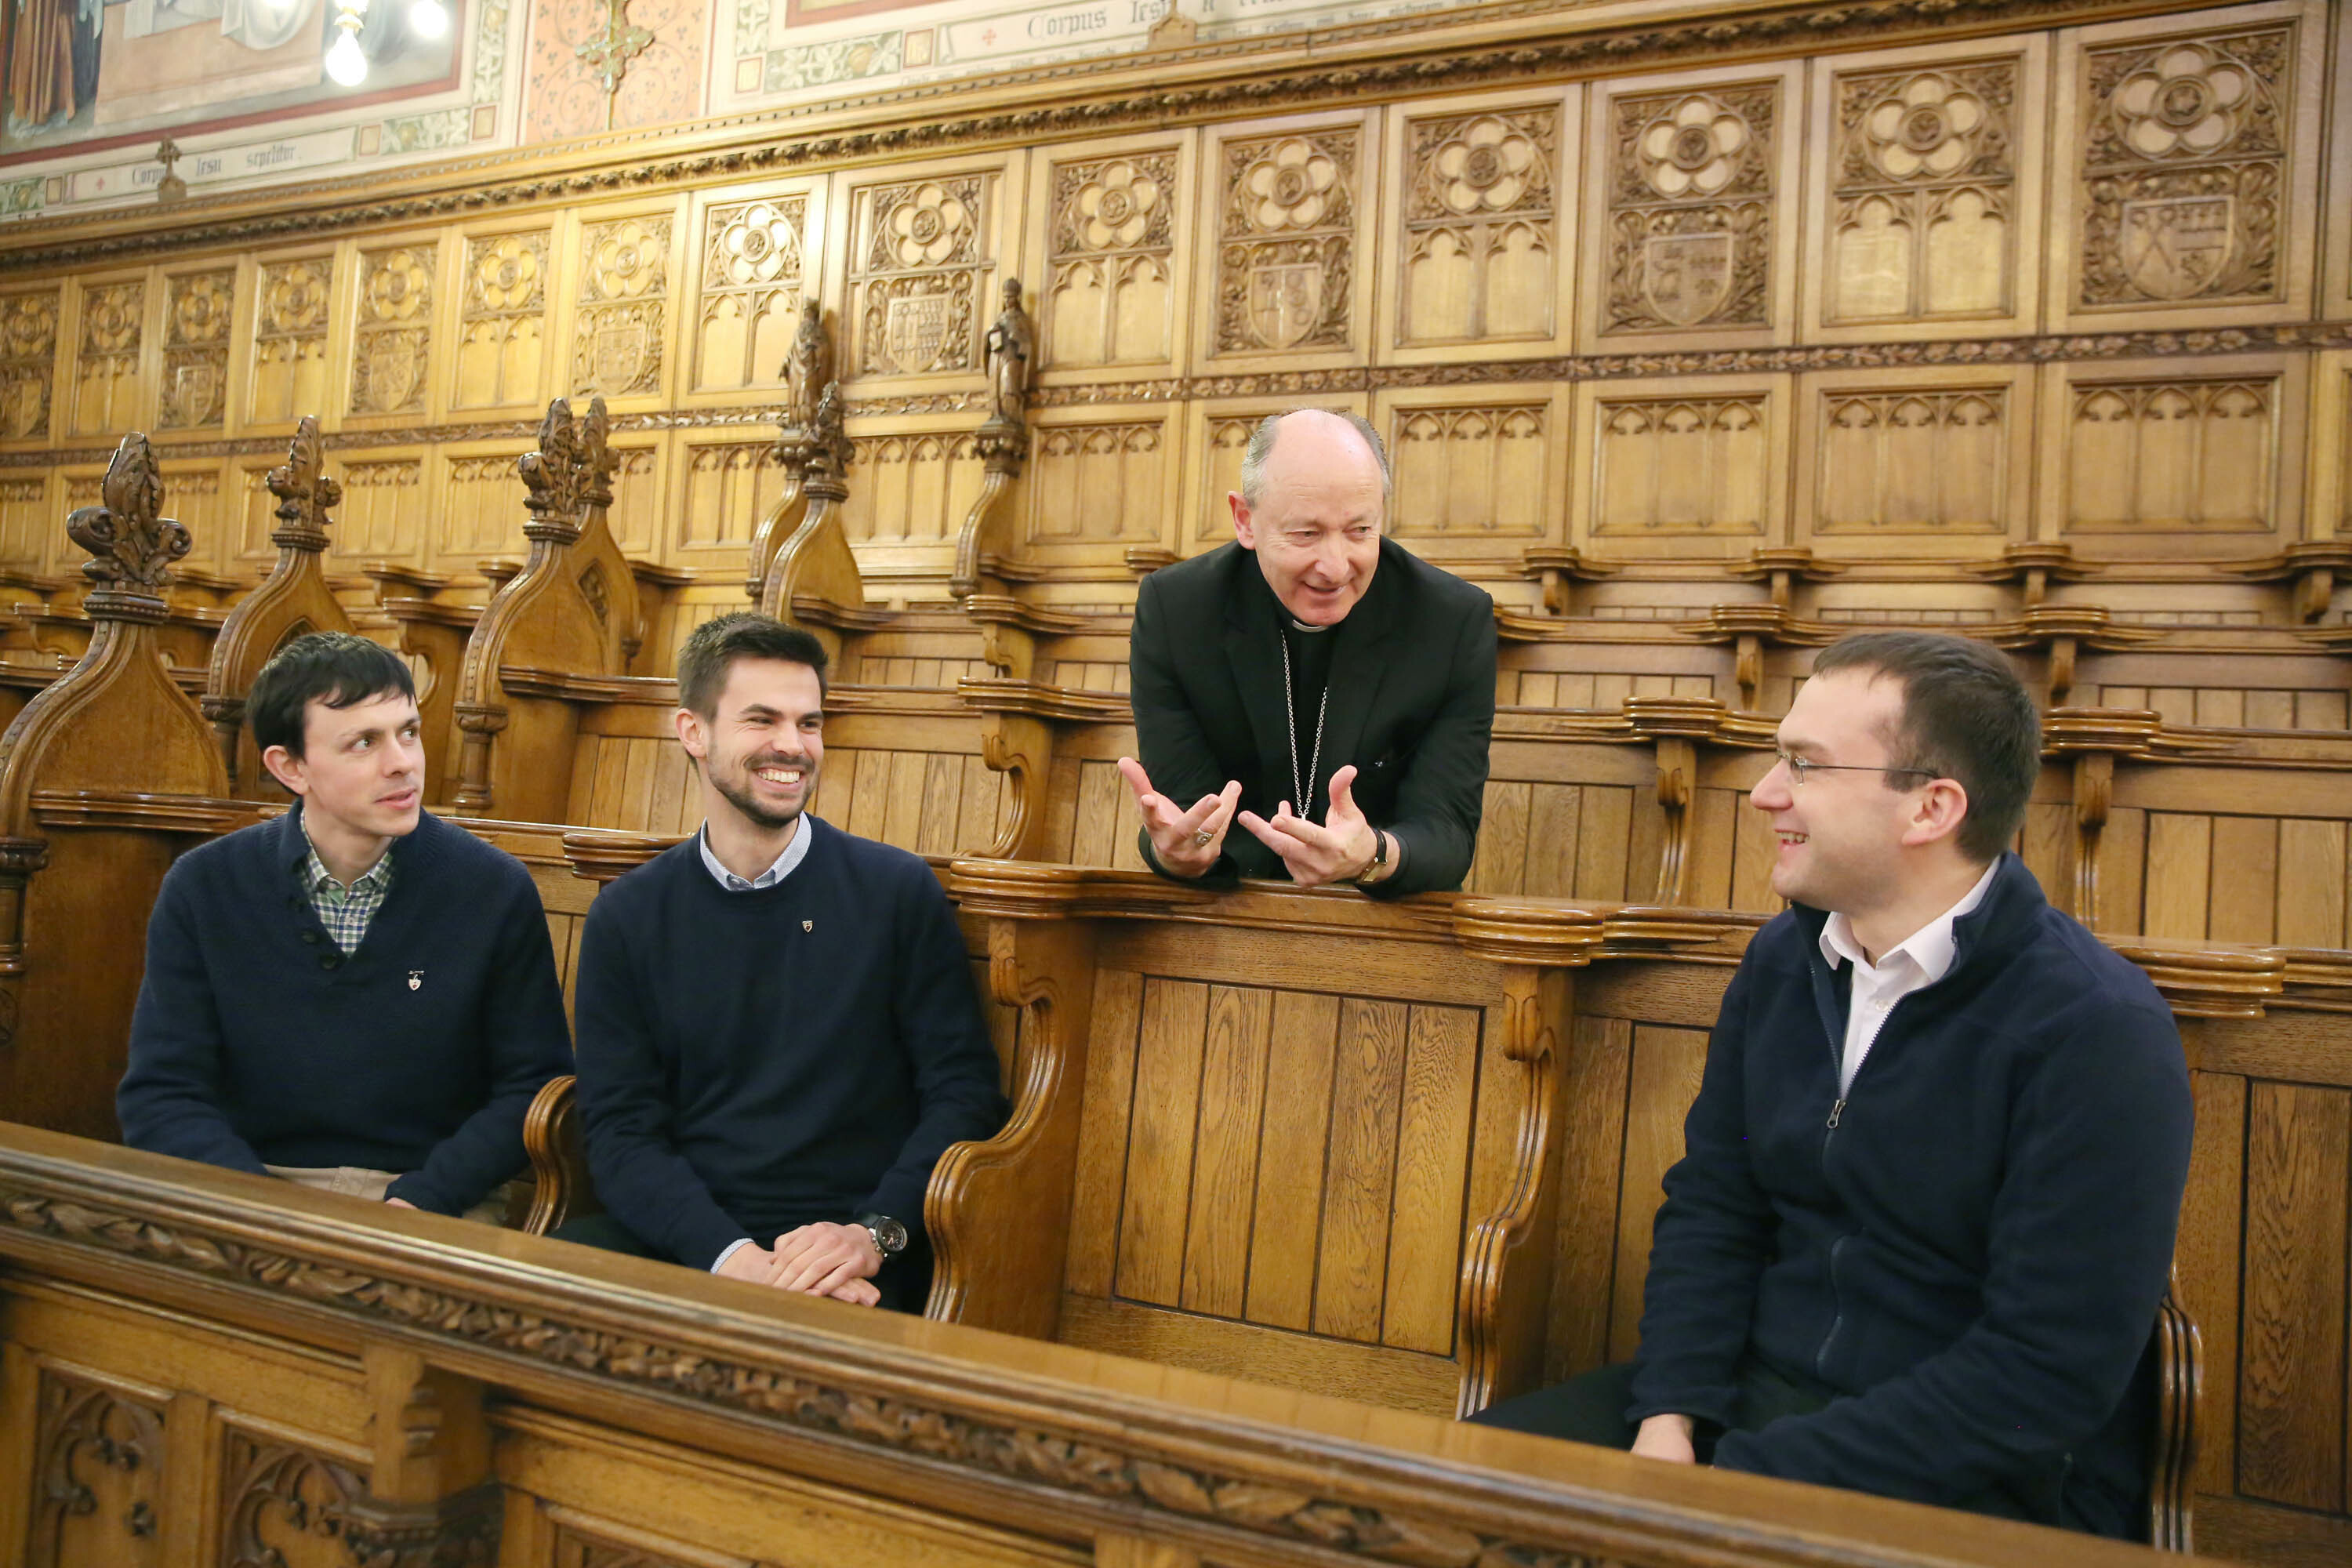 Vocations-pic-in-College-Chapel-Maynooth.jpg#asset:11437